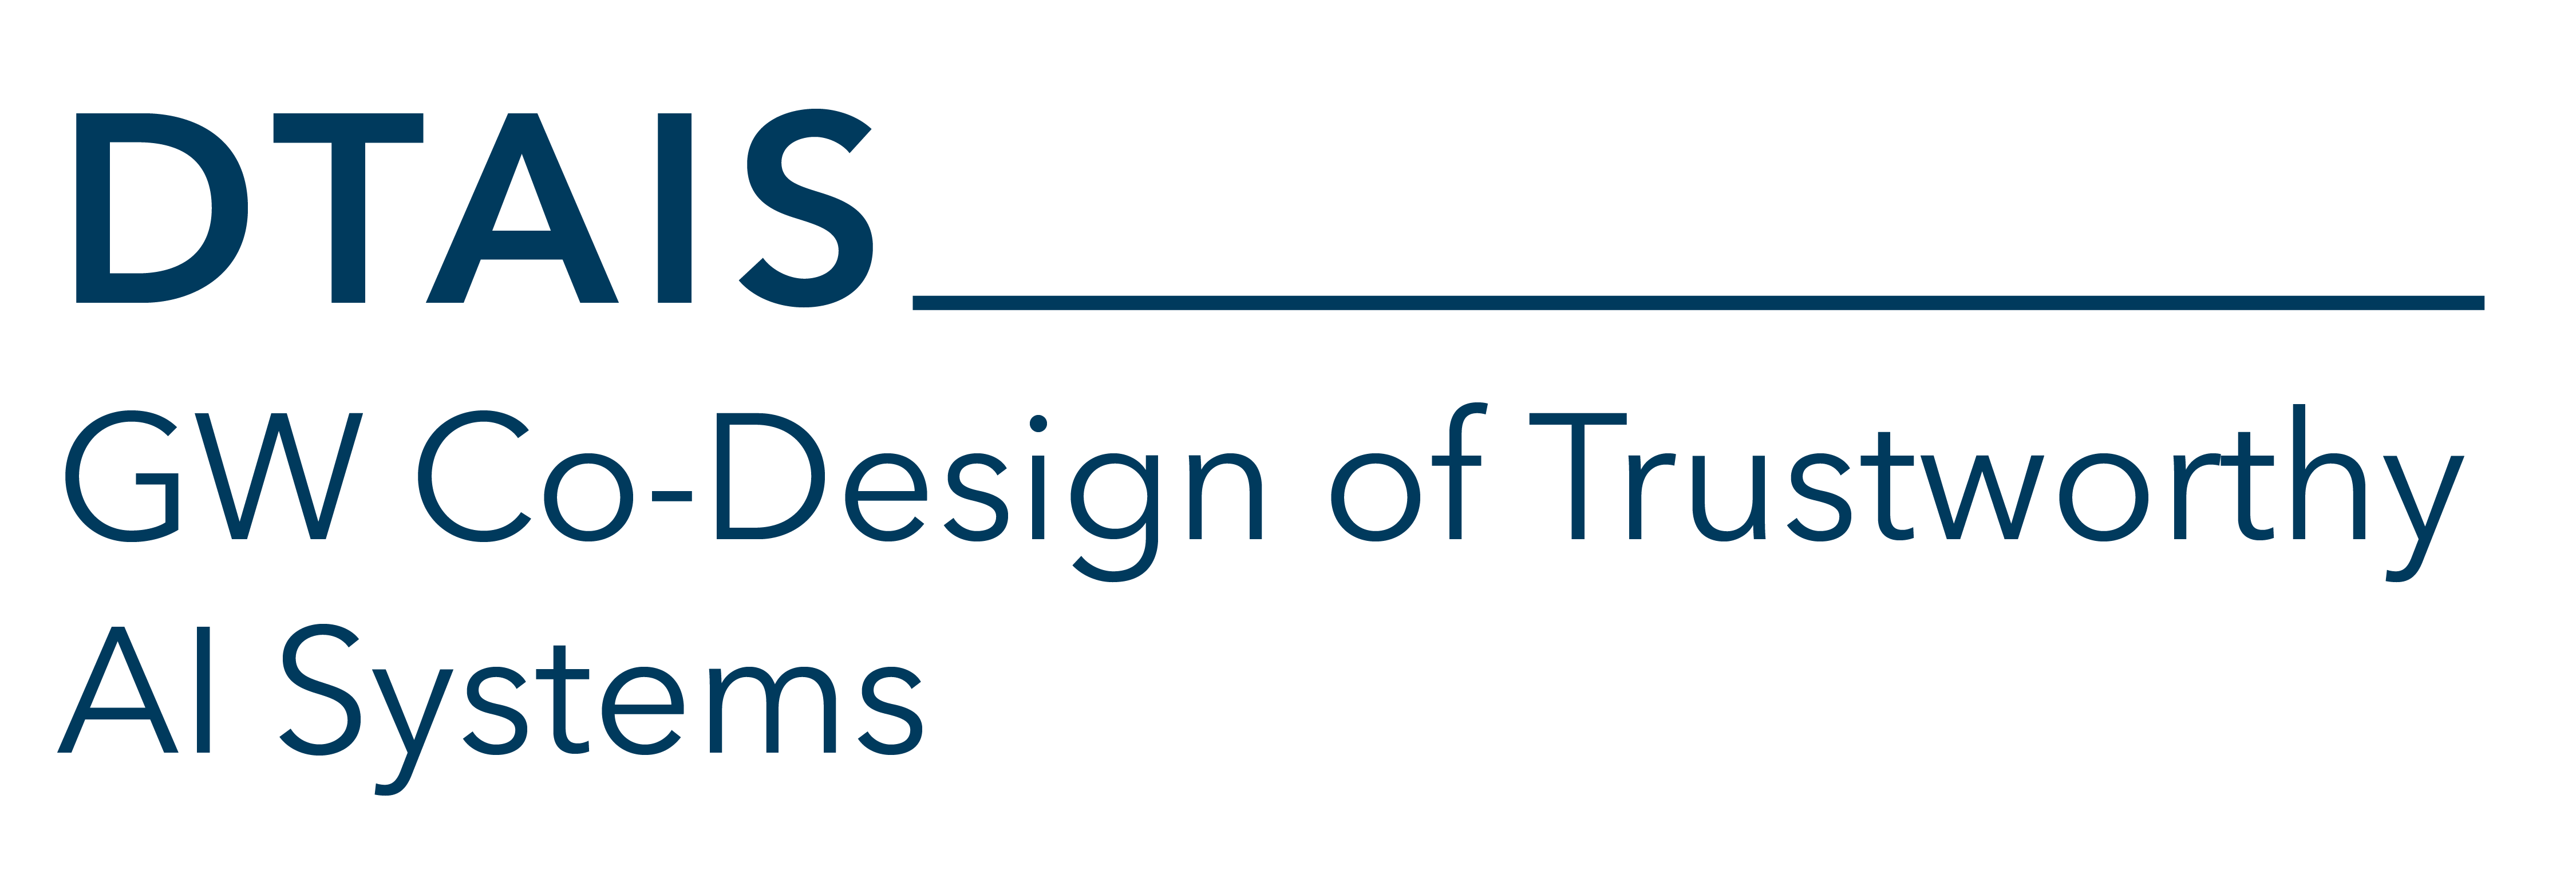 Co-Design of Trustworthy AI Systems | School of Engineering & Applied Science site logo